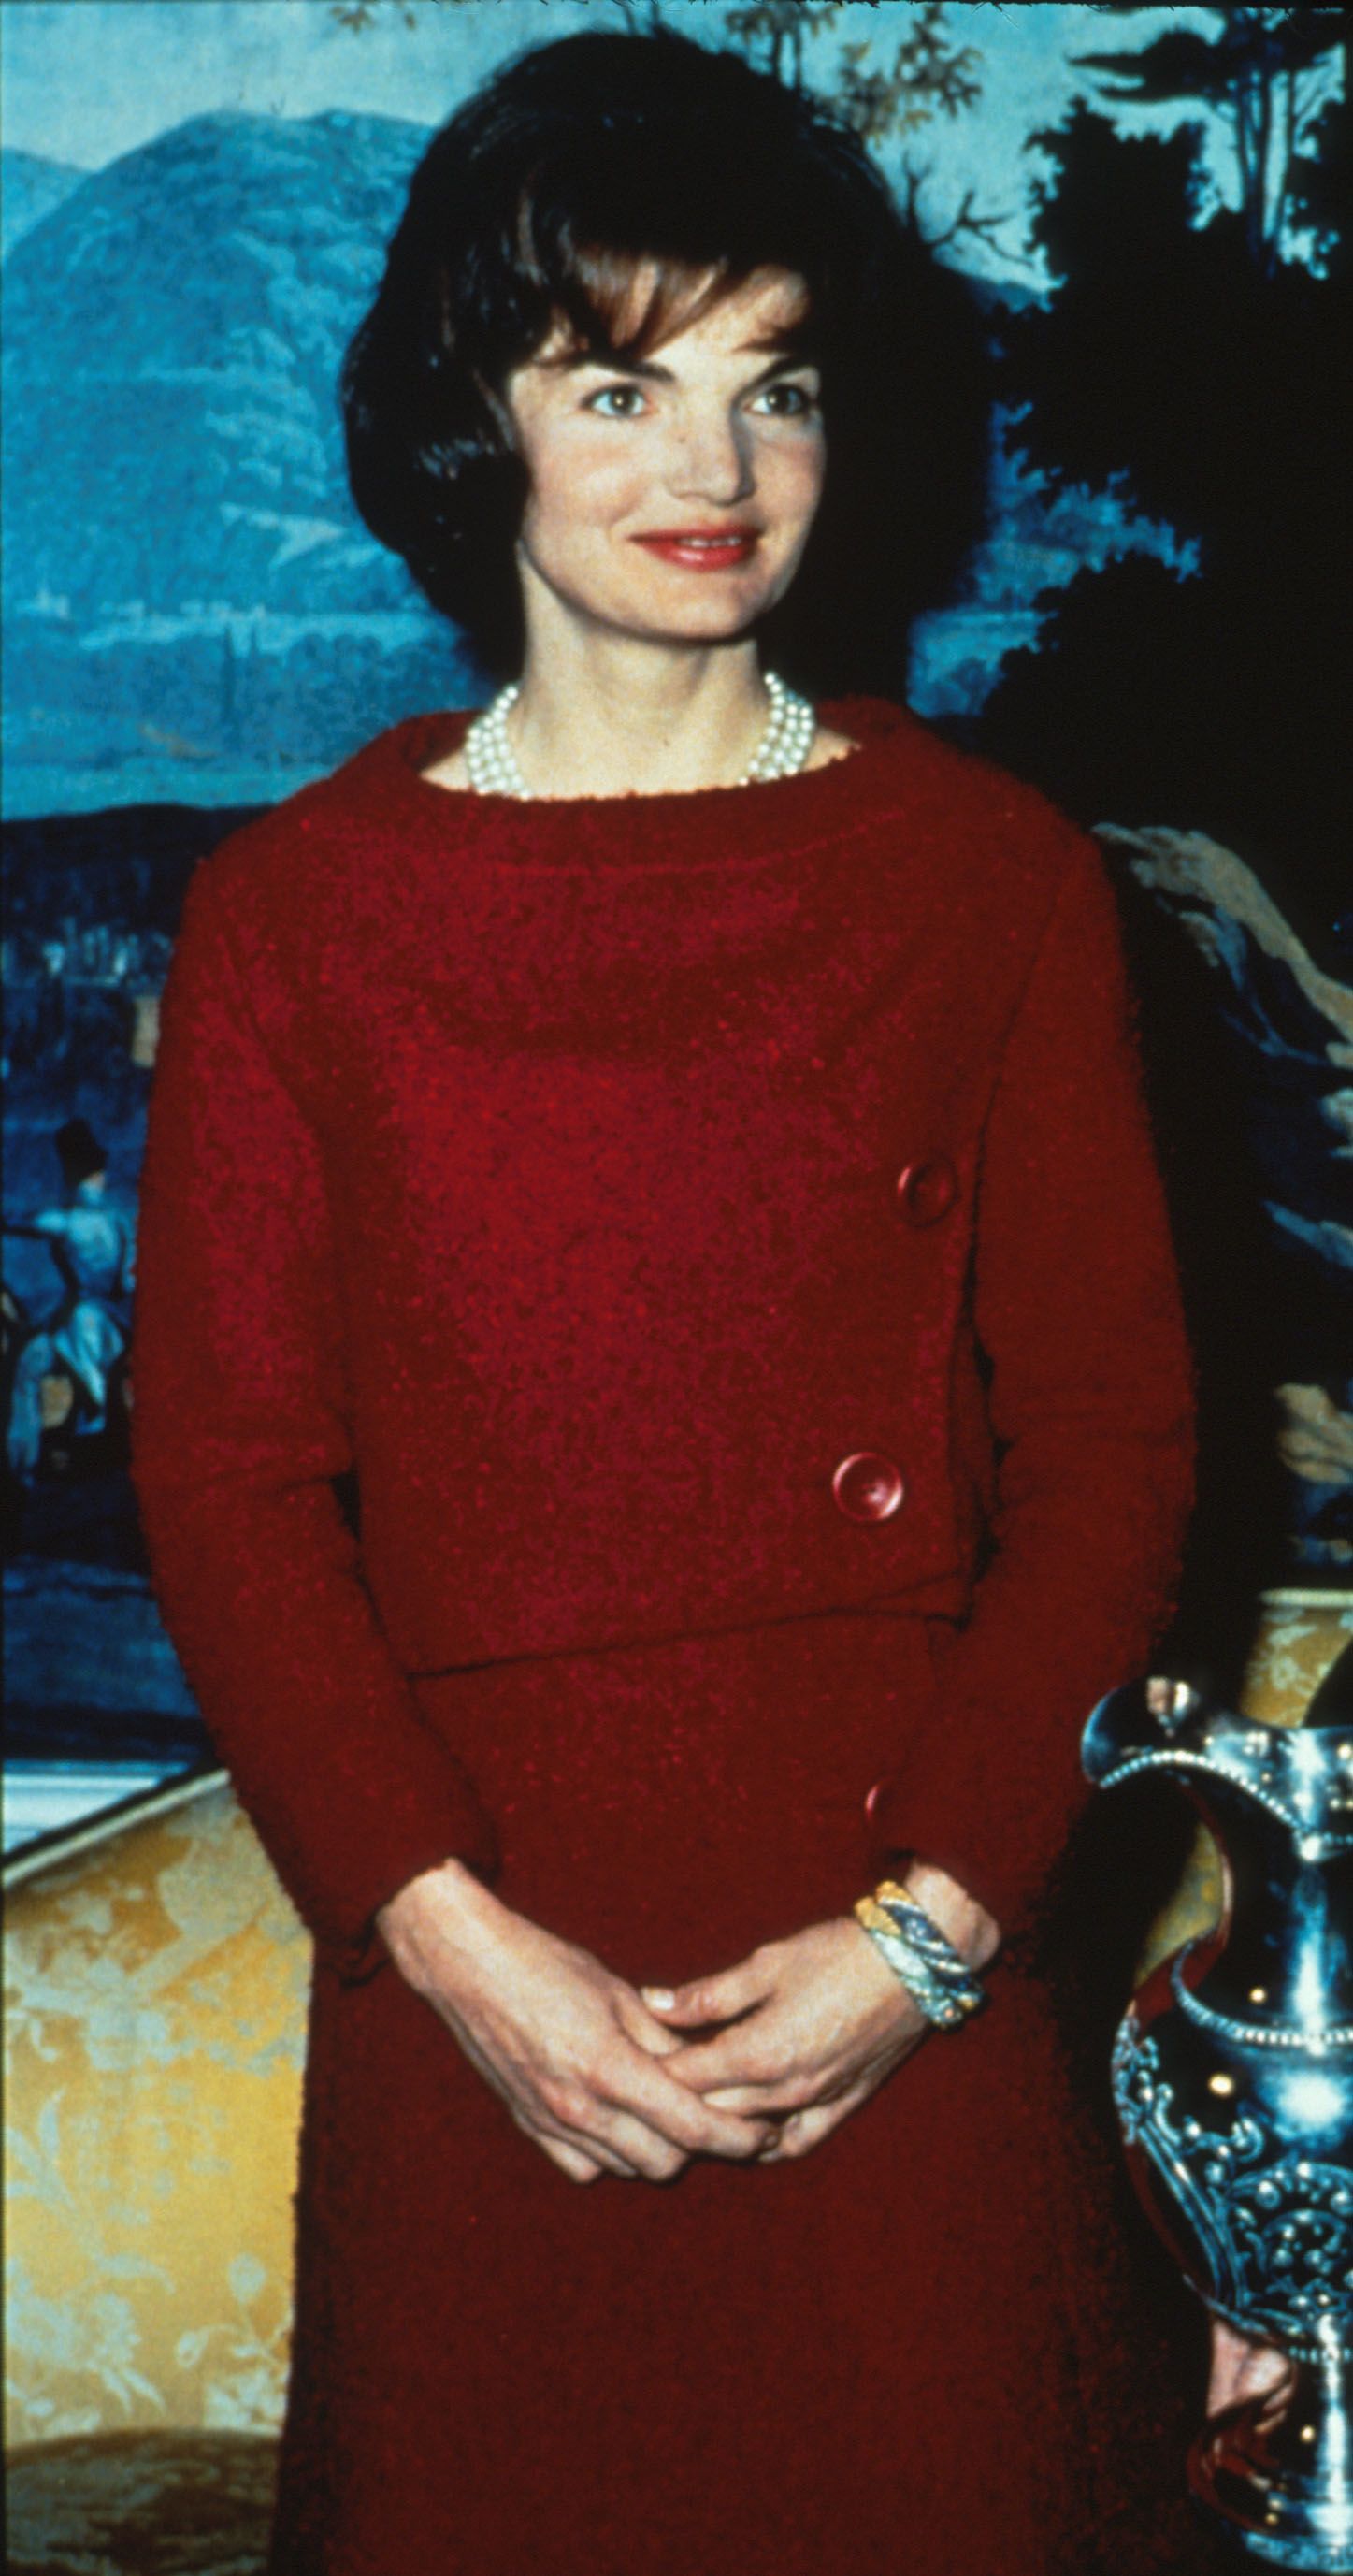 First Lady Jacqueline Kennedy on February 14, 1962, during a nationally televised Valentine's Day tour of the White House in Washington, Dc. | Photo: Getty Images